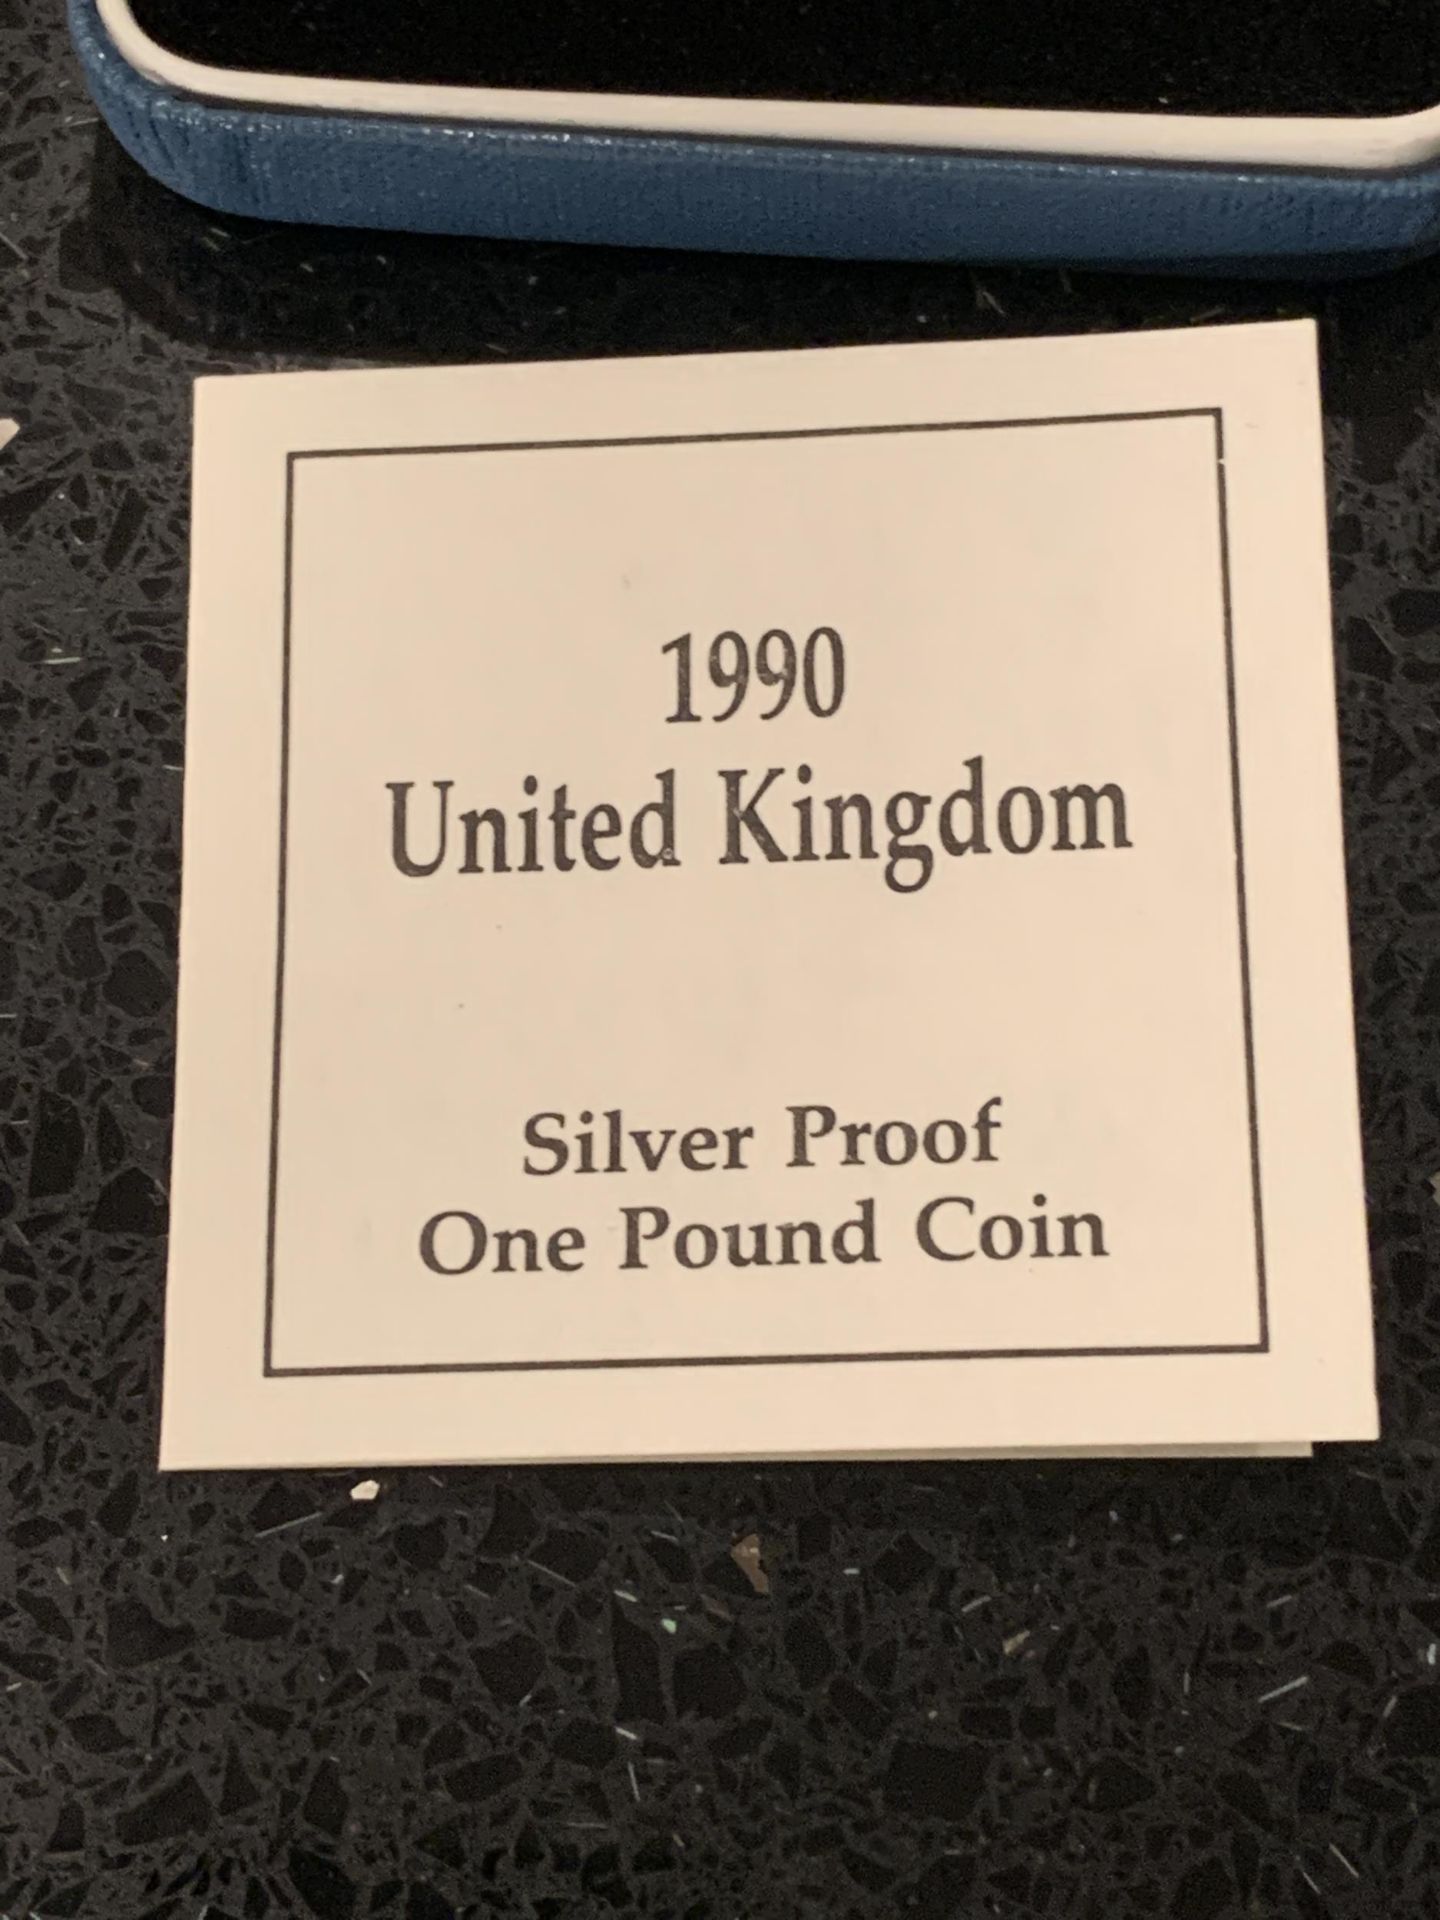 UK , CASED 1990 , ROYAL MINT , “LEEK IN CROWN” , SILVER PROOF ONE POUND COIN , ENCAPSULATED , WITH - Image 3 of 4